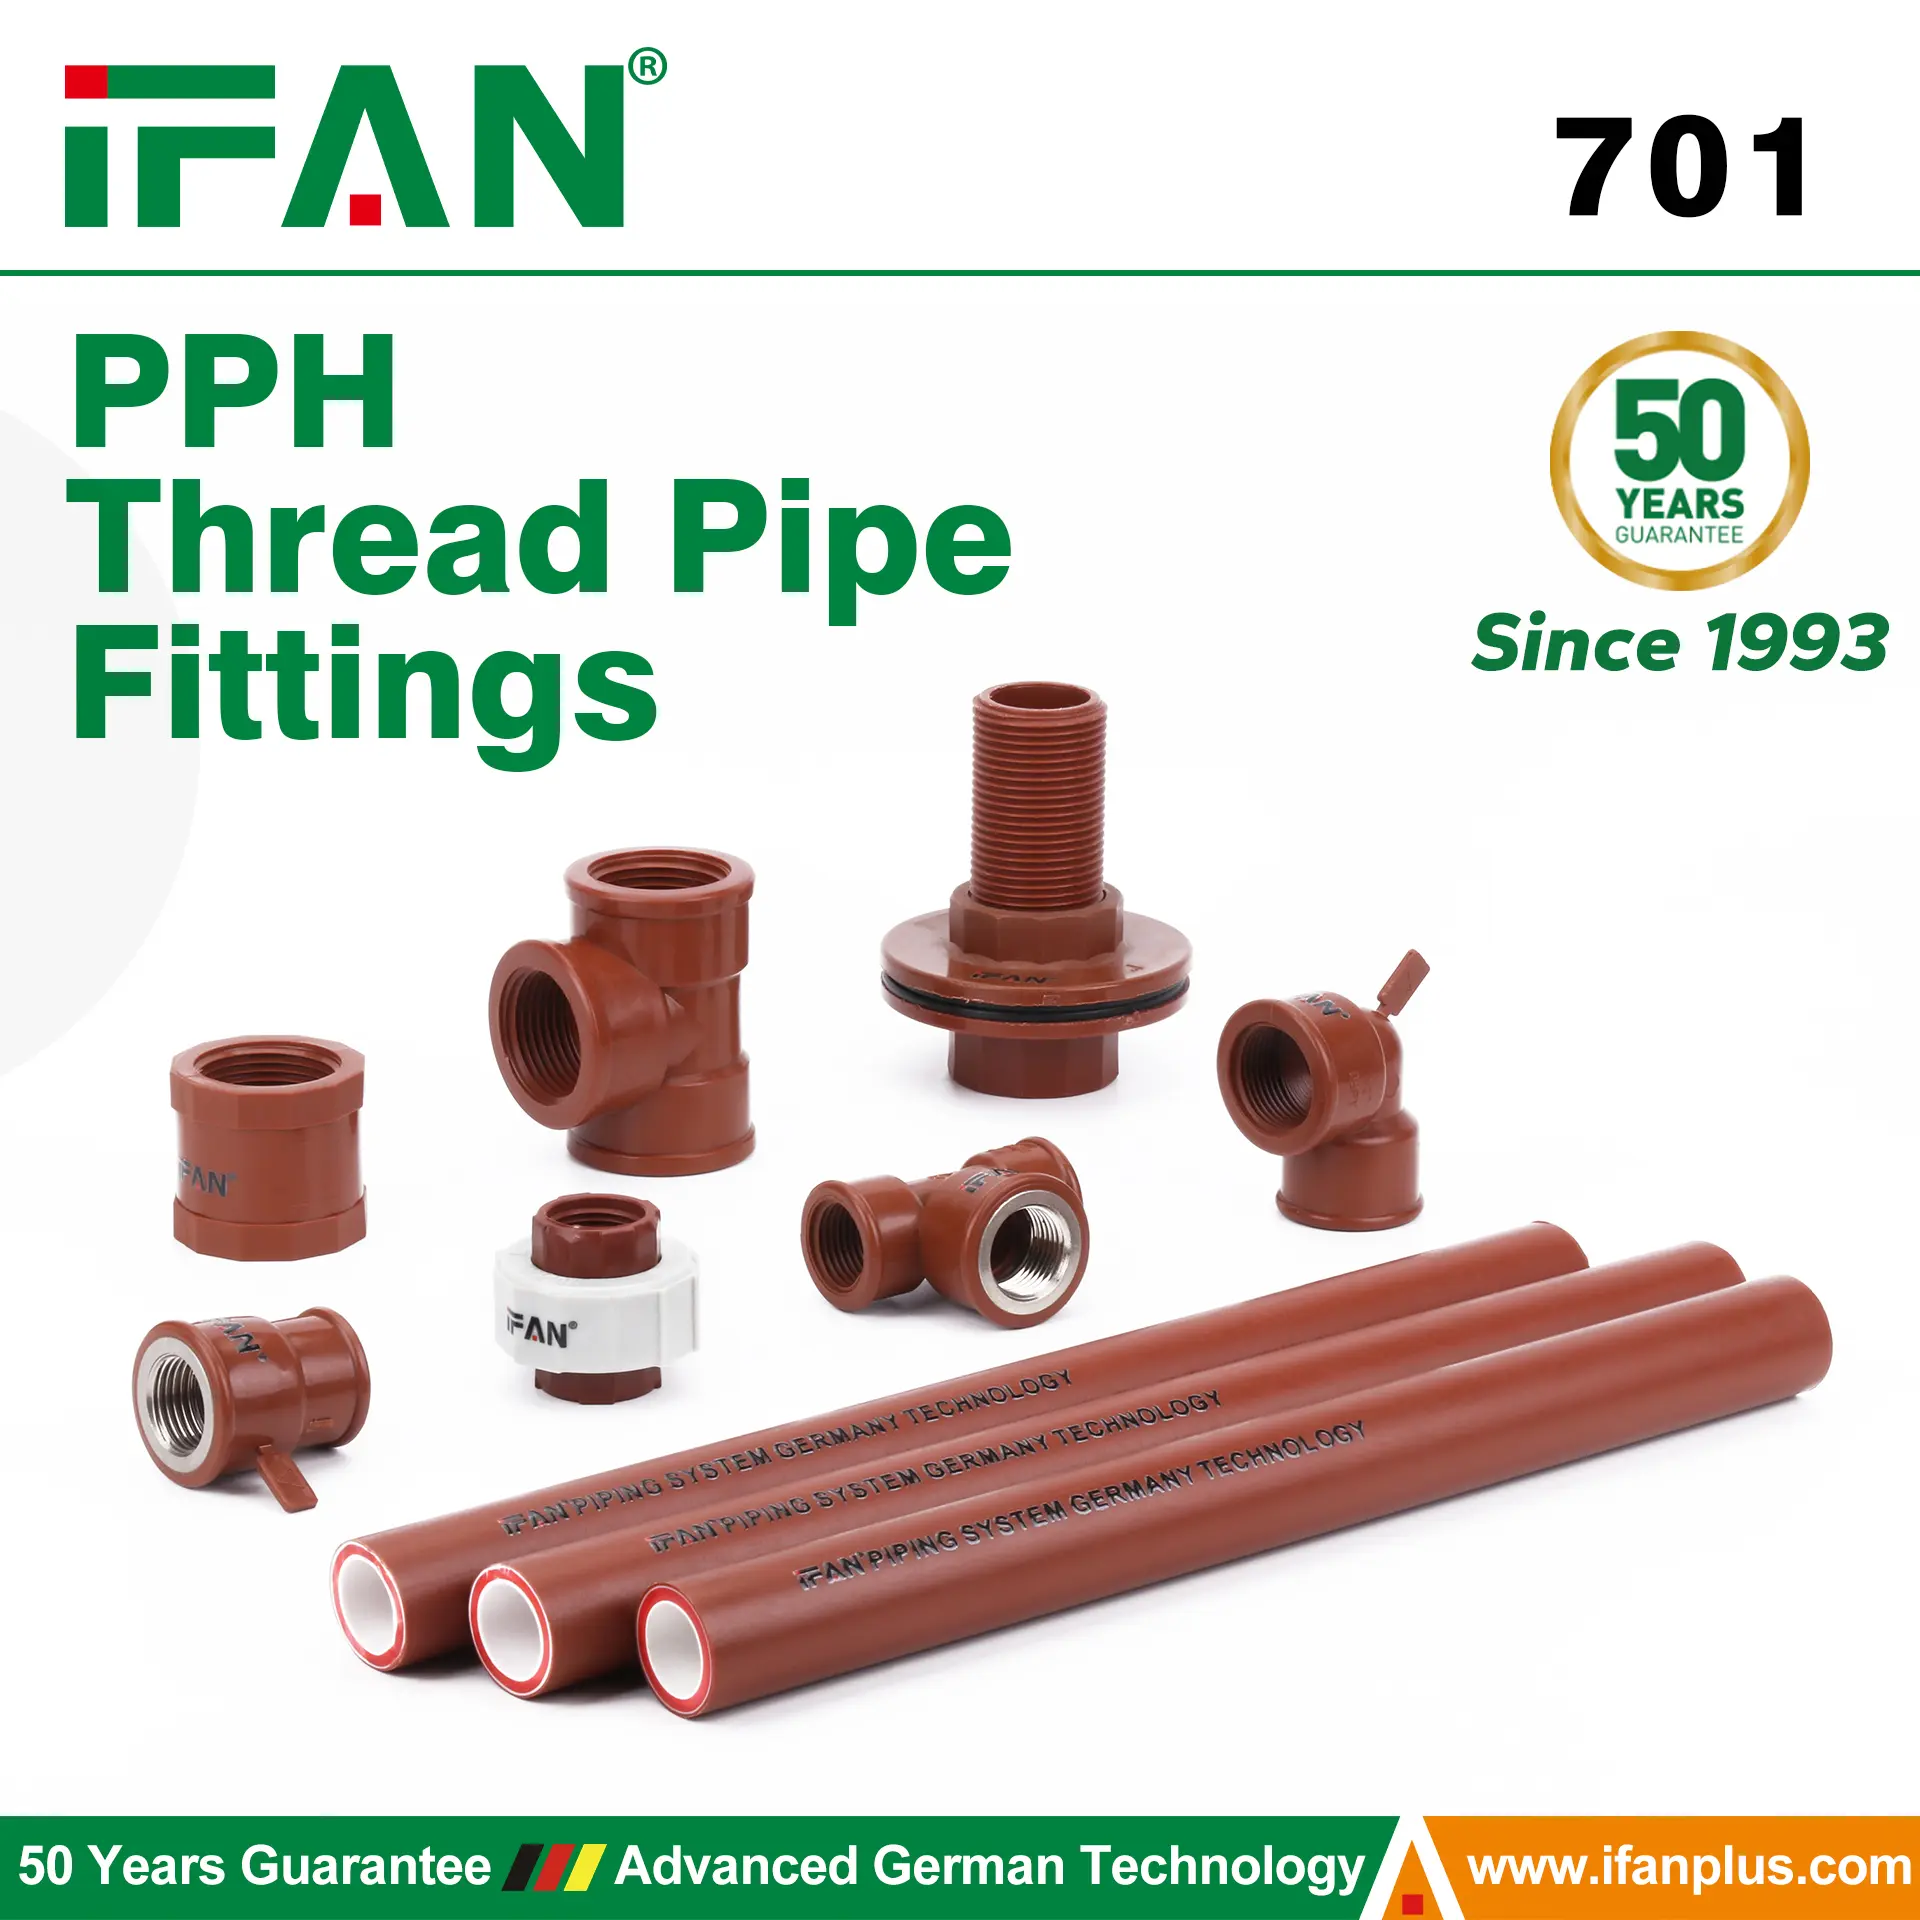 PPH Thread Pipe Fittings 701